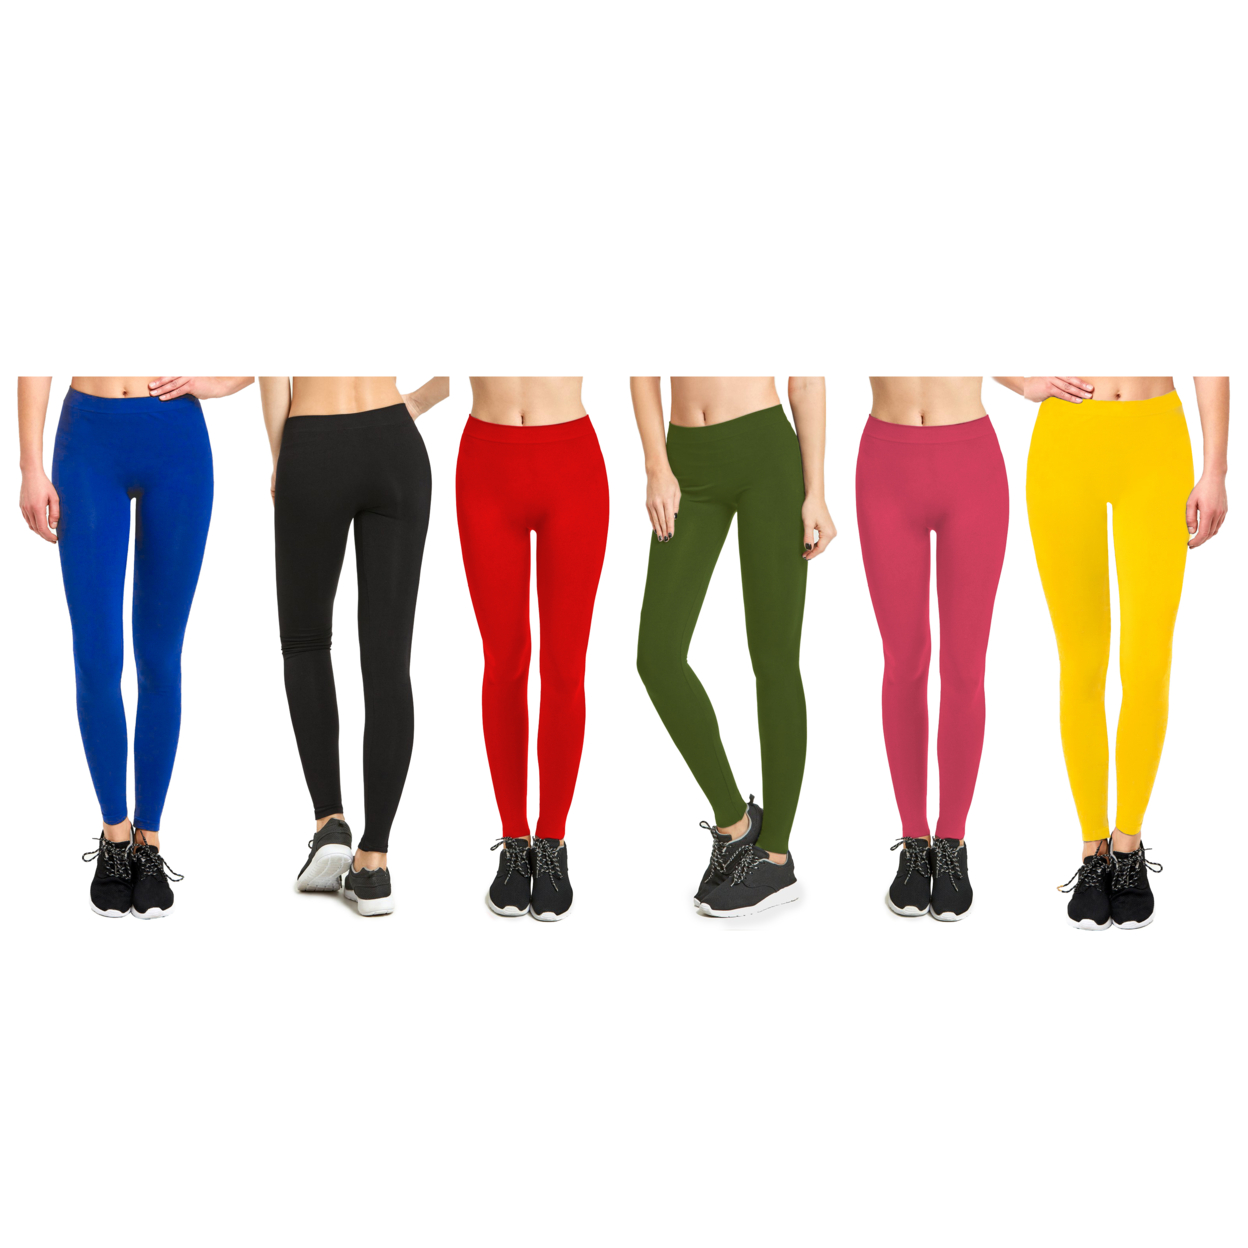 4-Pack: Women's Slim Fit Comfy Stretchy Elastic Waistband Leggings - Large, Solid